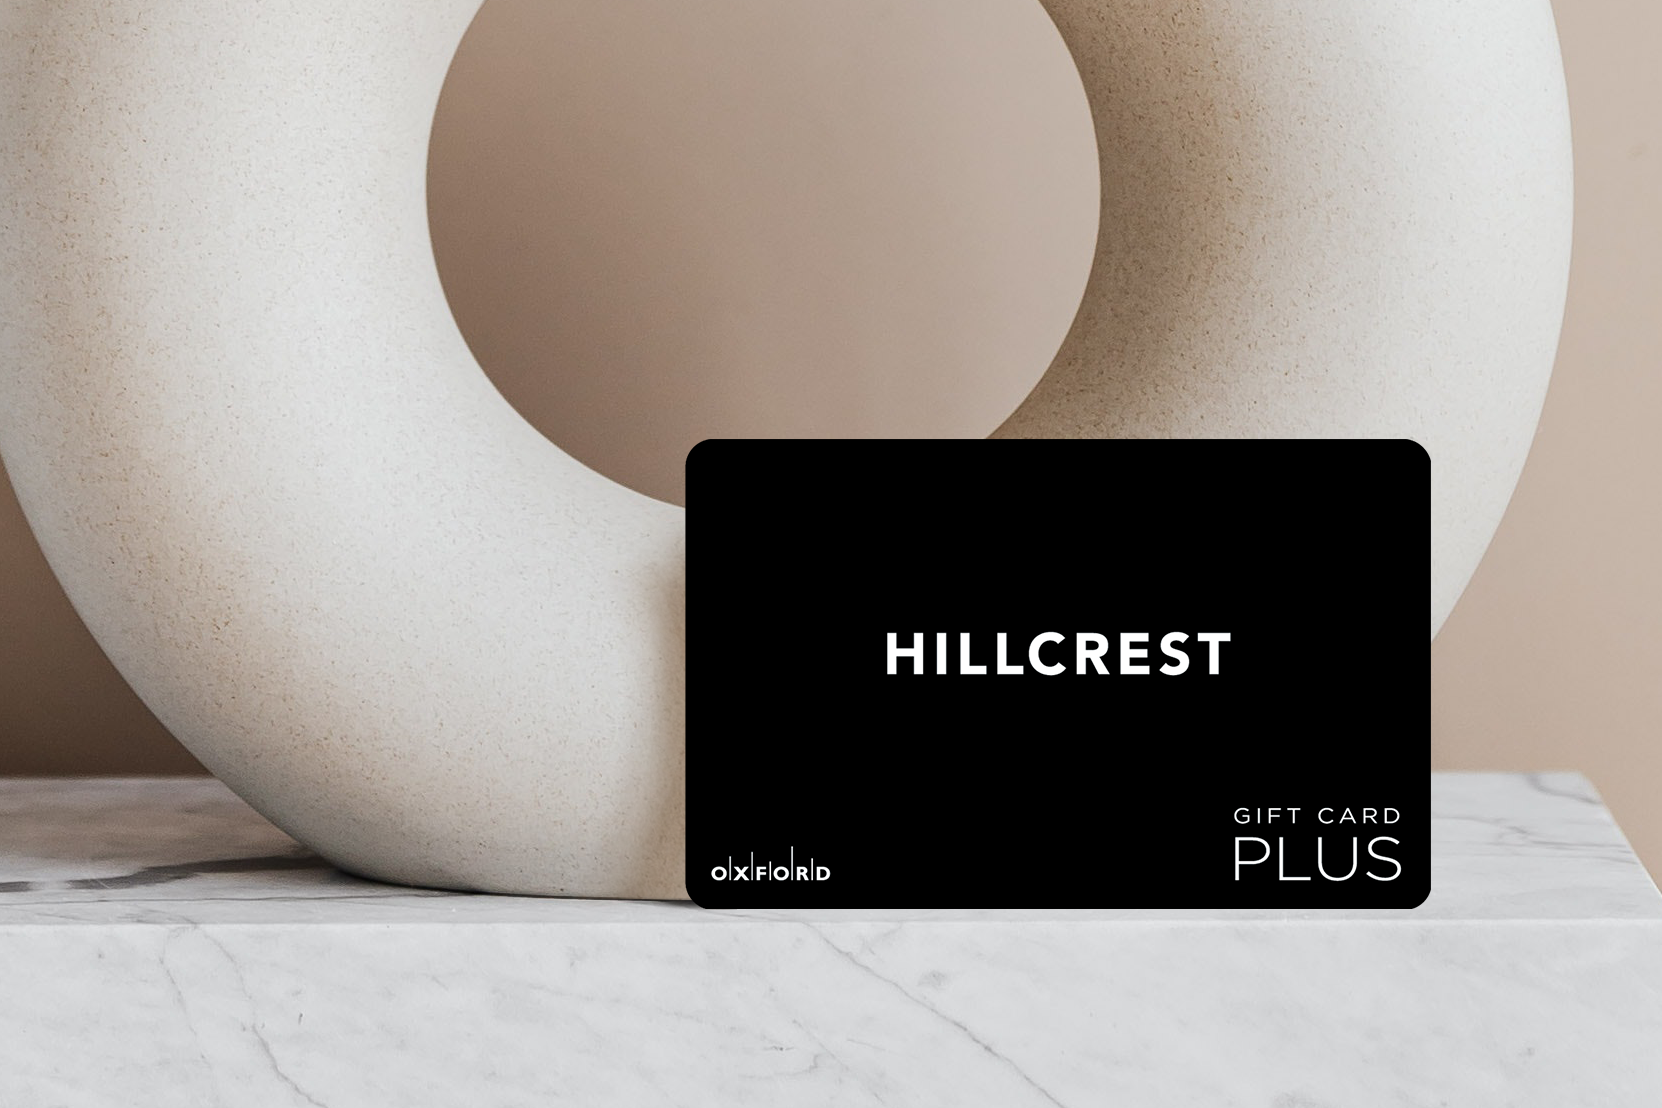 a promotional image of a black Hillcrest gift card in front of a neutral ceramic circular vase